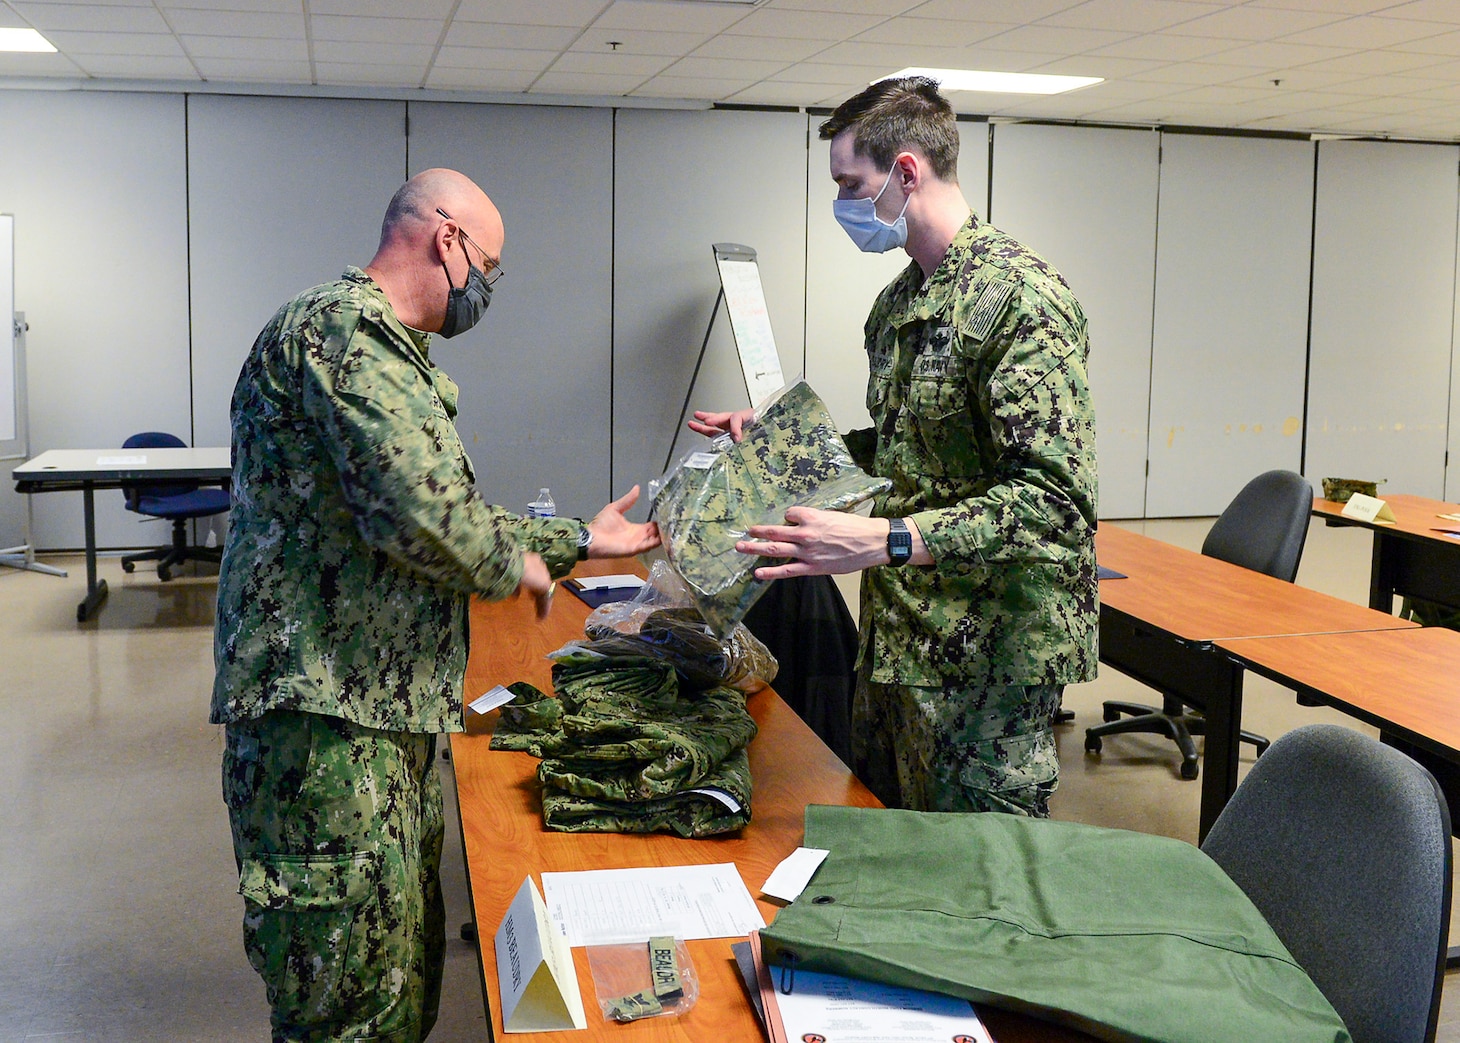 FORT WORTH, Texas (Feb. 16, 2022) - Navy Reserve Region Readiness and Mobilization Command Fort Worth Adaptive Mobilization department staff member Logistics Specialist 1st Class Wilfred Graf, left, issues uniform items to Hospital Corpsman 3rd Class Garrett Beaudry, assigned to Naval Branch Health Clinic San Diego, in preparation for Beaudry’s individual augmentee (IA) assignment to Guantamo Bay, Cuba. IA and mobilization for Selected Reserve processing for Beaudry and other Sailors took place during an adaptive mobilization-enabling event at Navy Reserve Region Readiness and Mobilization Command Fort Worth (REDCOM FW) February 14-18. The event was observed by assessors from Expeditionary Combat Readiness Center, who certified REDCOM FW as a Navy mobilization processing site with delegated Local Area Coordinator for Mobilization (LACMOB) authority. (U.S. Navy photo by Mass Communication Specialist 1st Class Lawrence Davis)